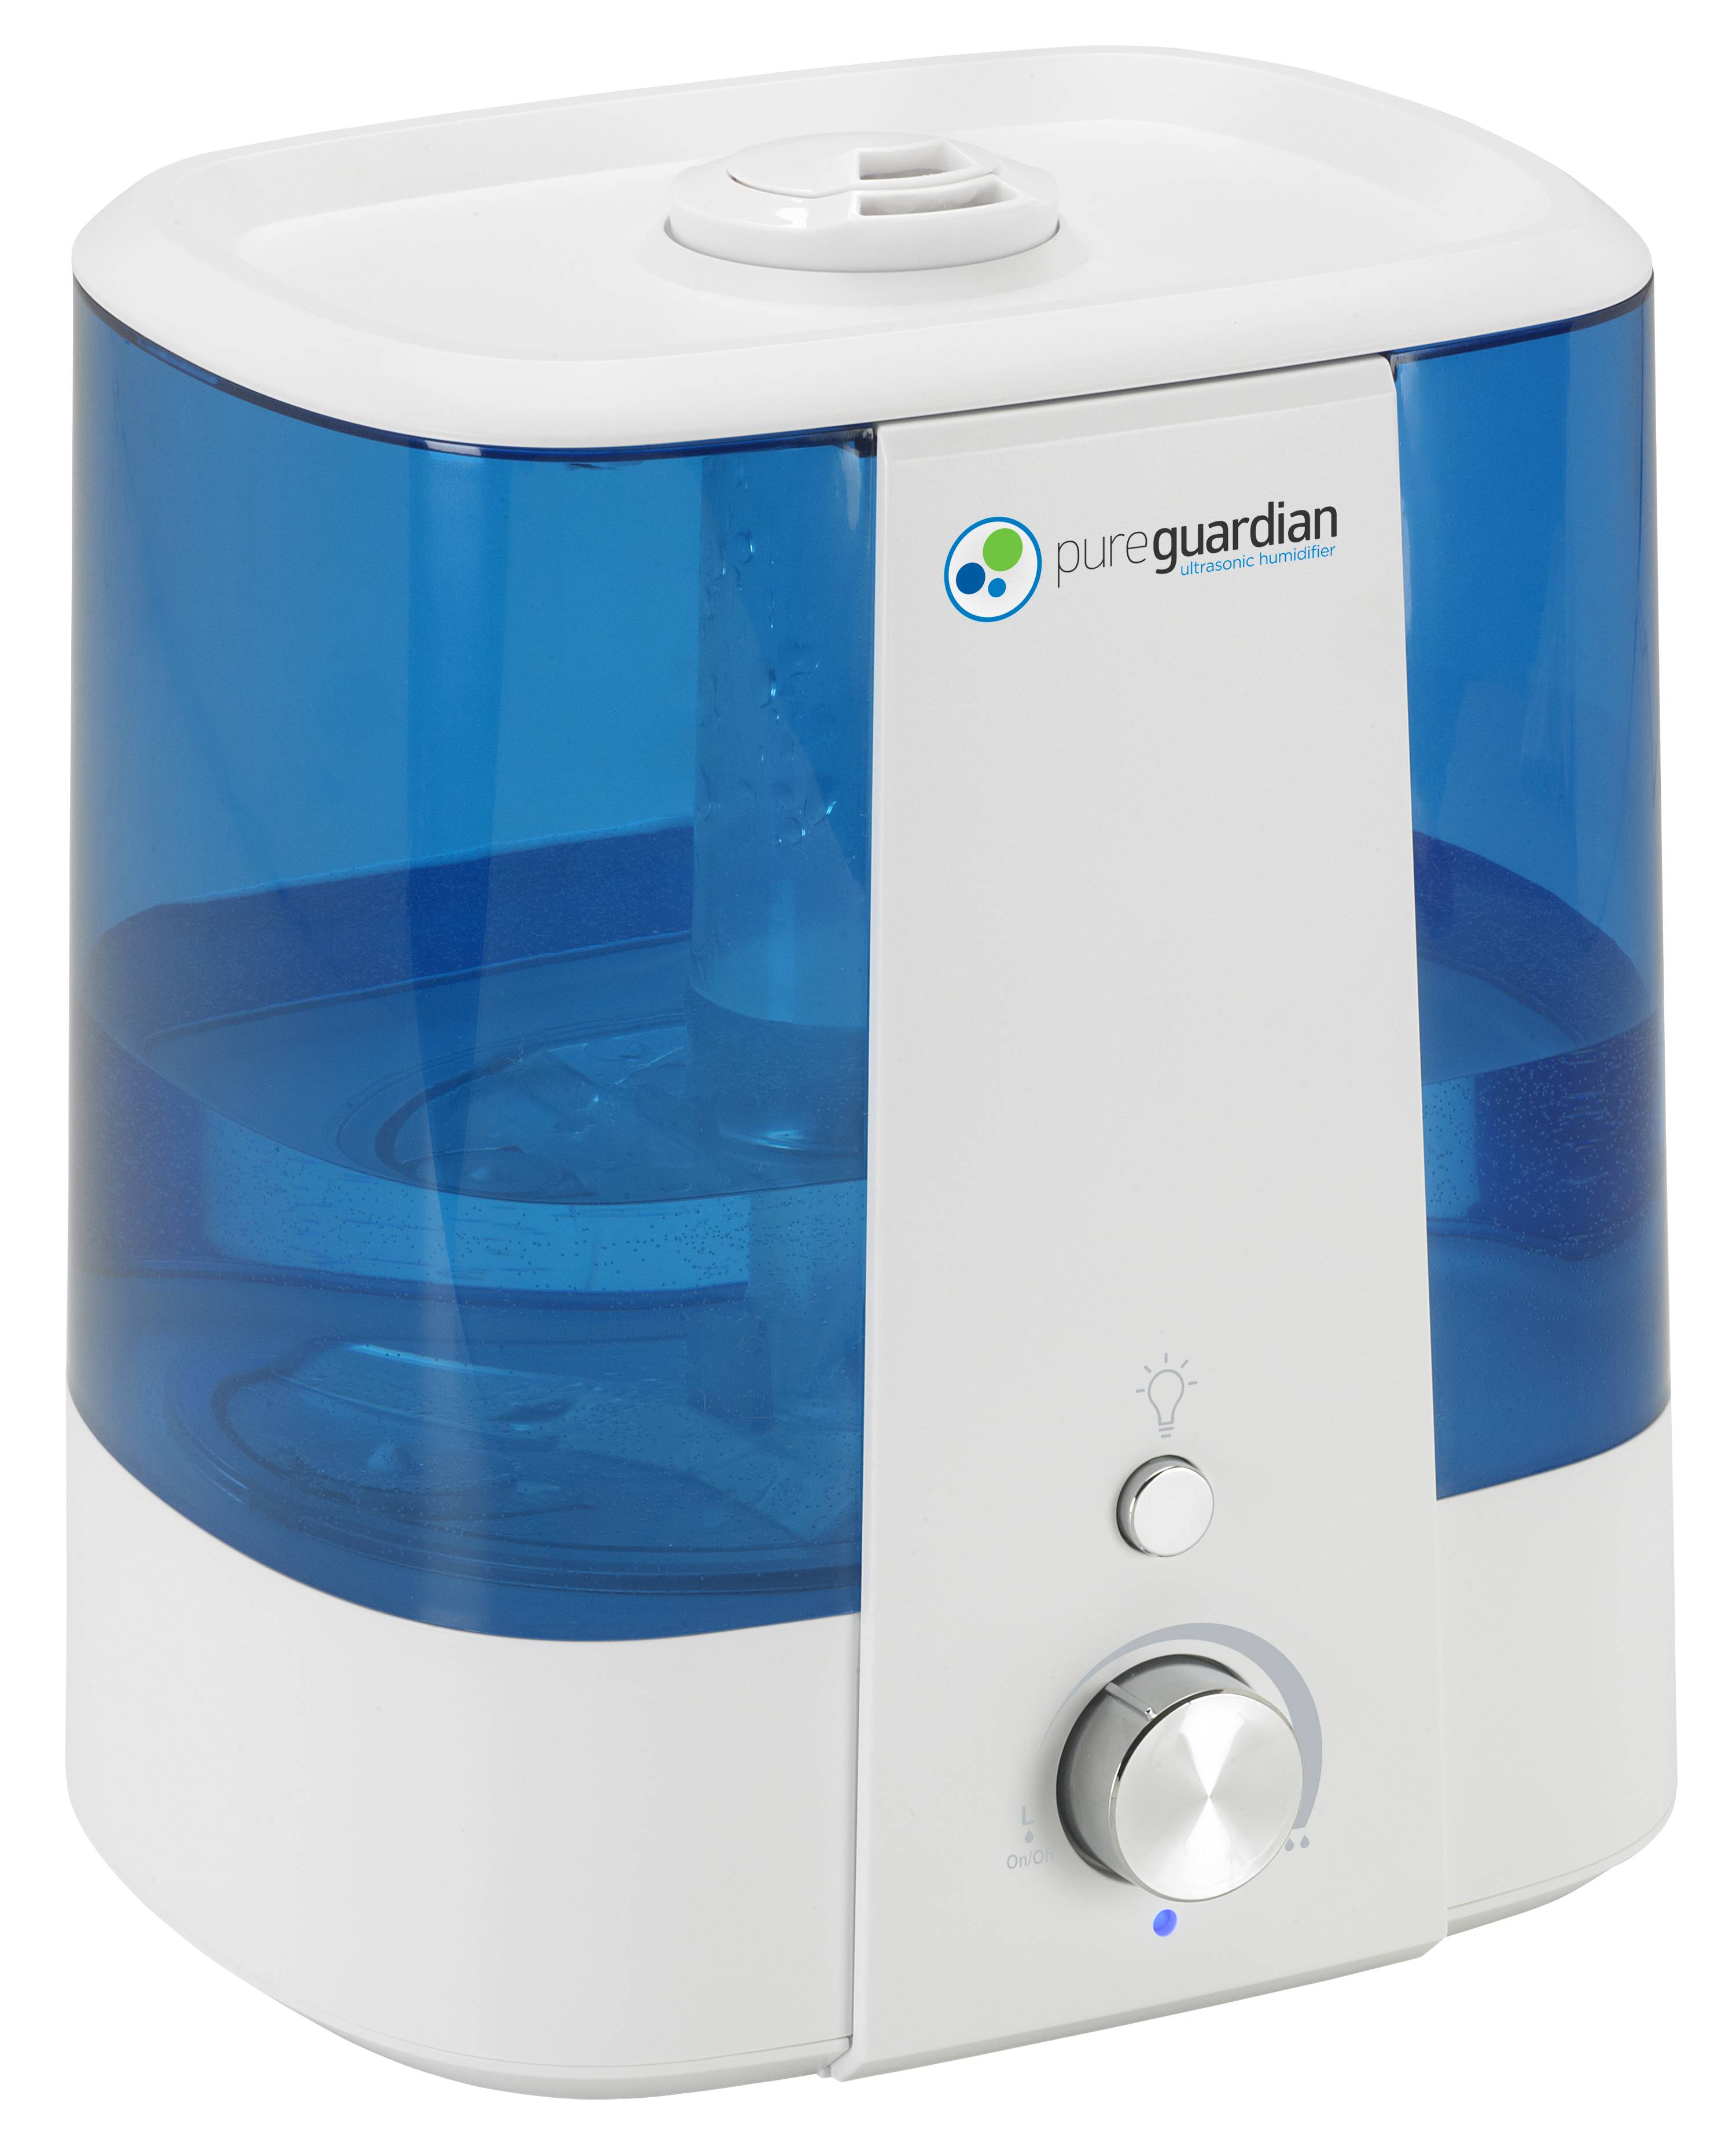 PureGuardian 90-Hour, 1.5 Gallon Cool Mist Ultrasonic Humidifier with Aroma Tray, H1175WCA - image 1 of 12